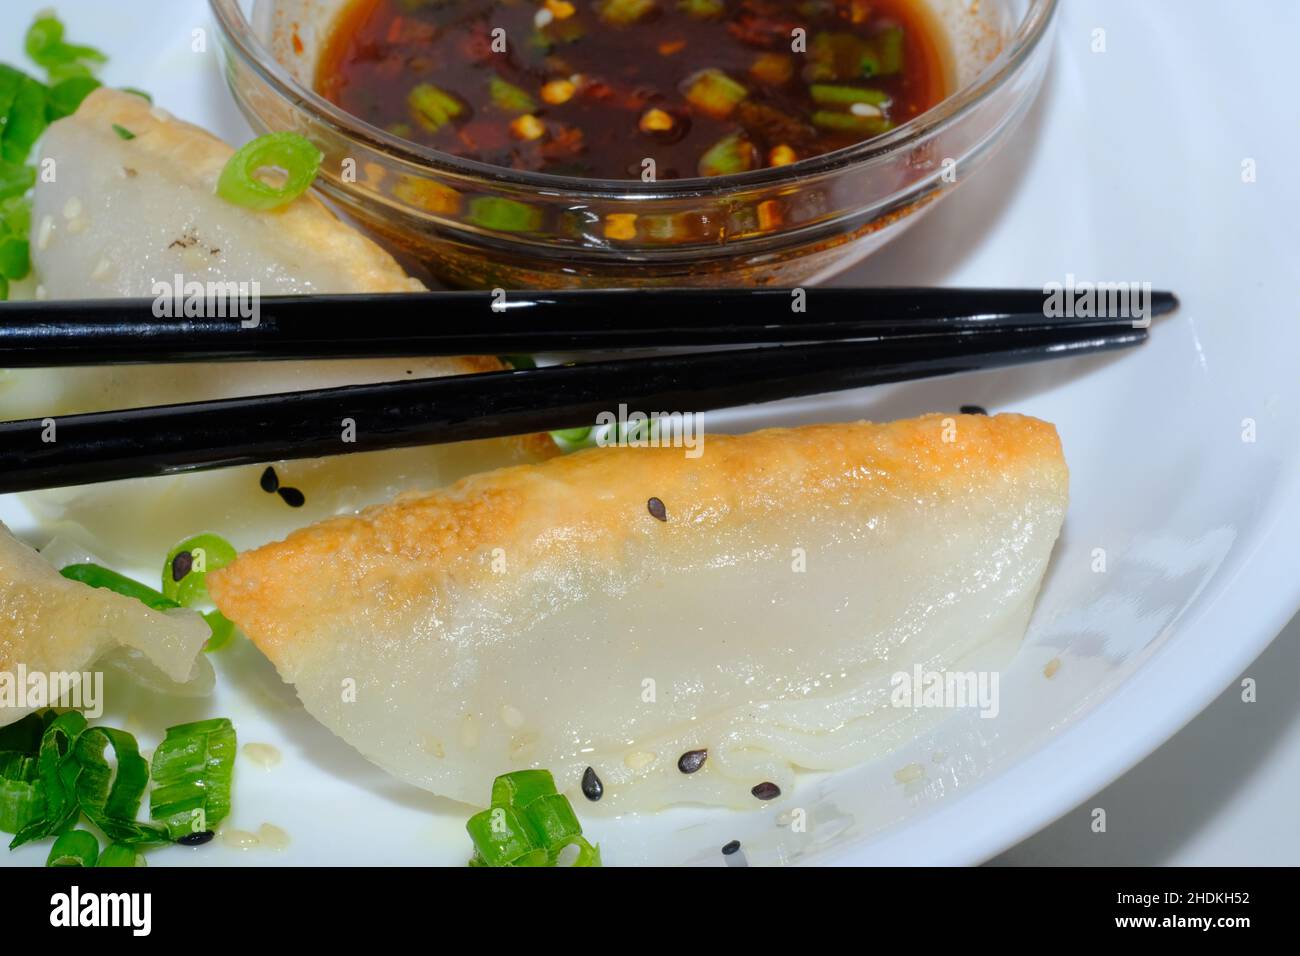 Homemade fried Asian potsticker dumpling appetizer with spicy ponzu dipping sauce Stock Photo